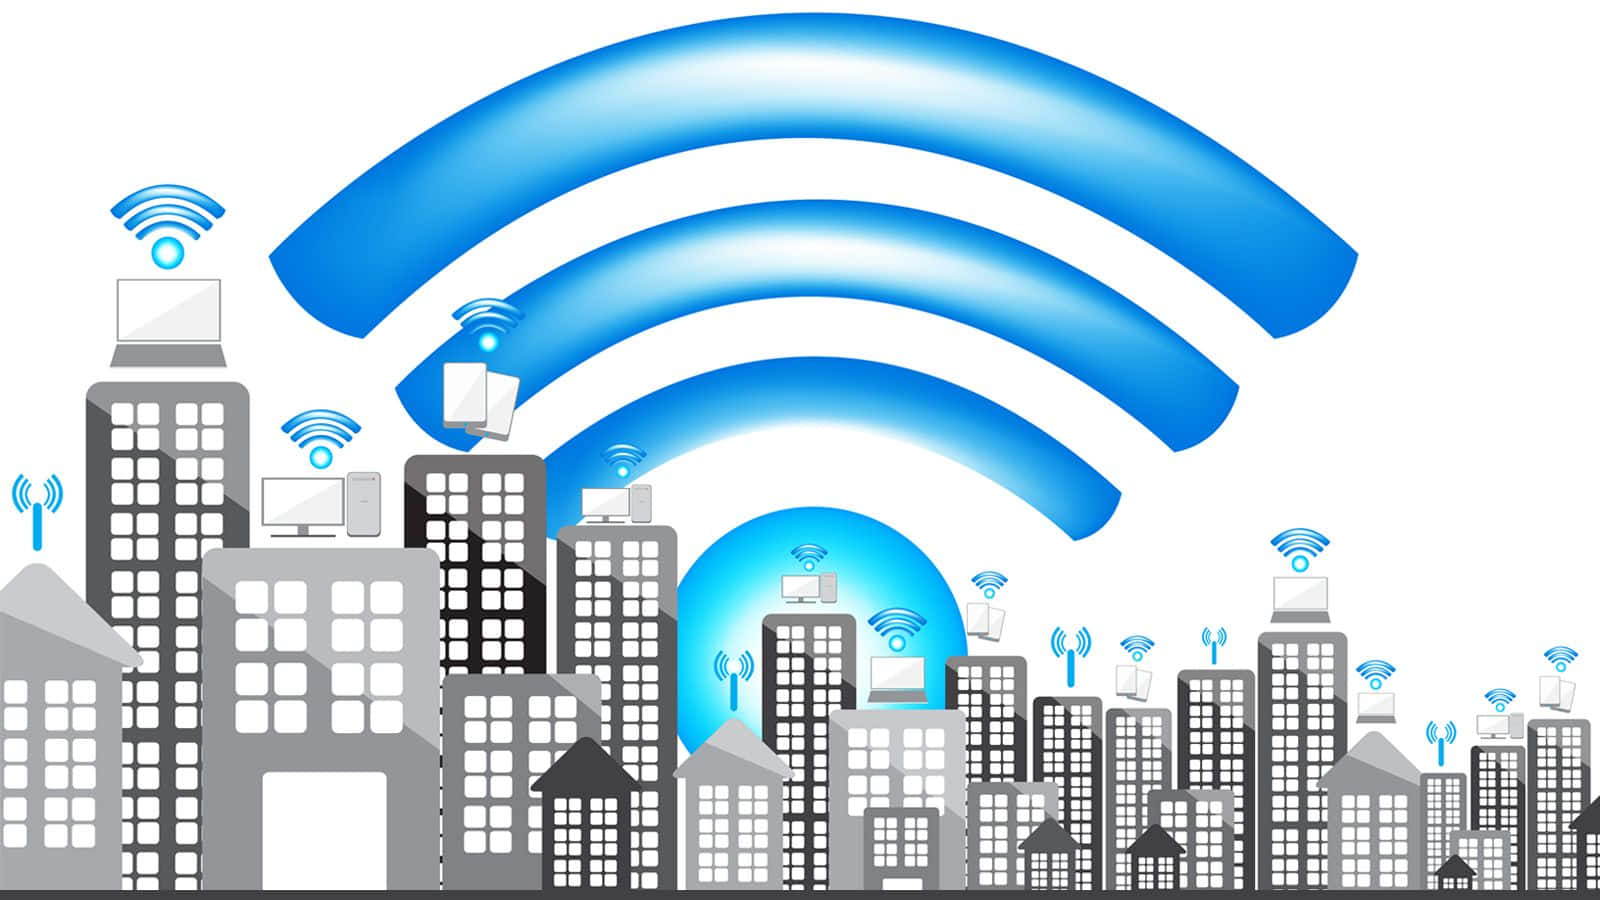 Stay Connected With 3g/4g Lte Wireless Coverage Background